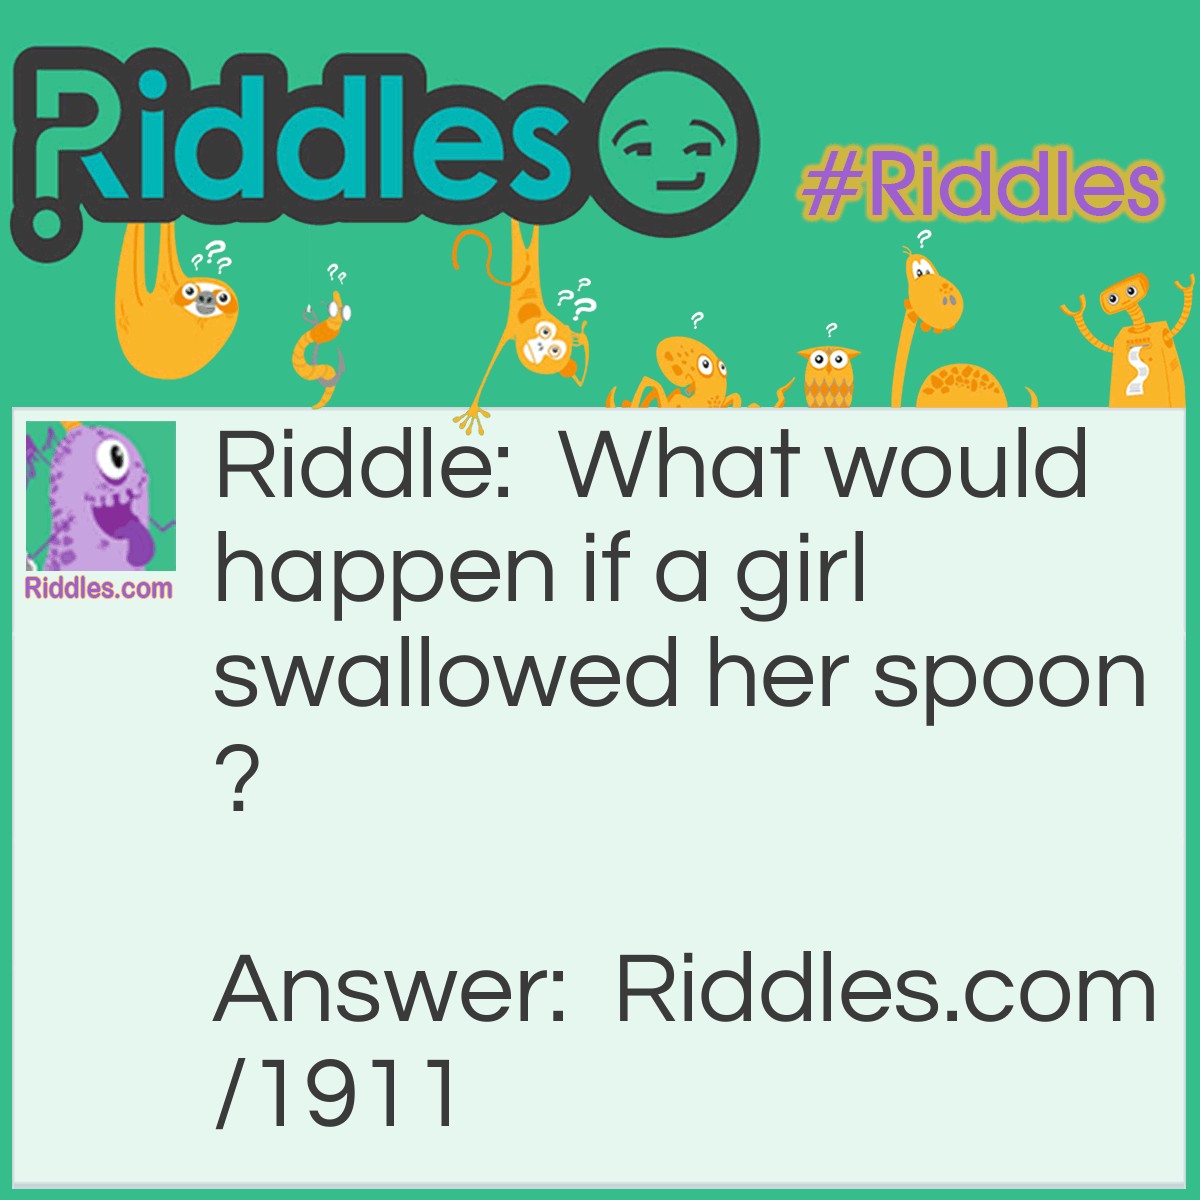 Riddle: What would happen if a girl swallowed her spoon? Answer: She couldn't stir.